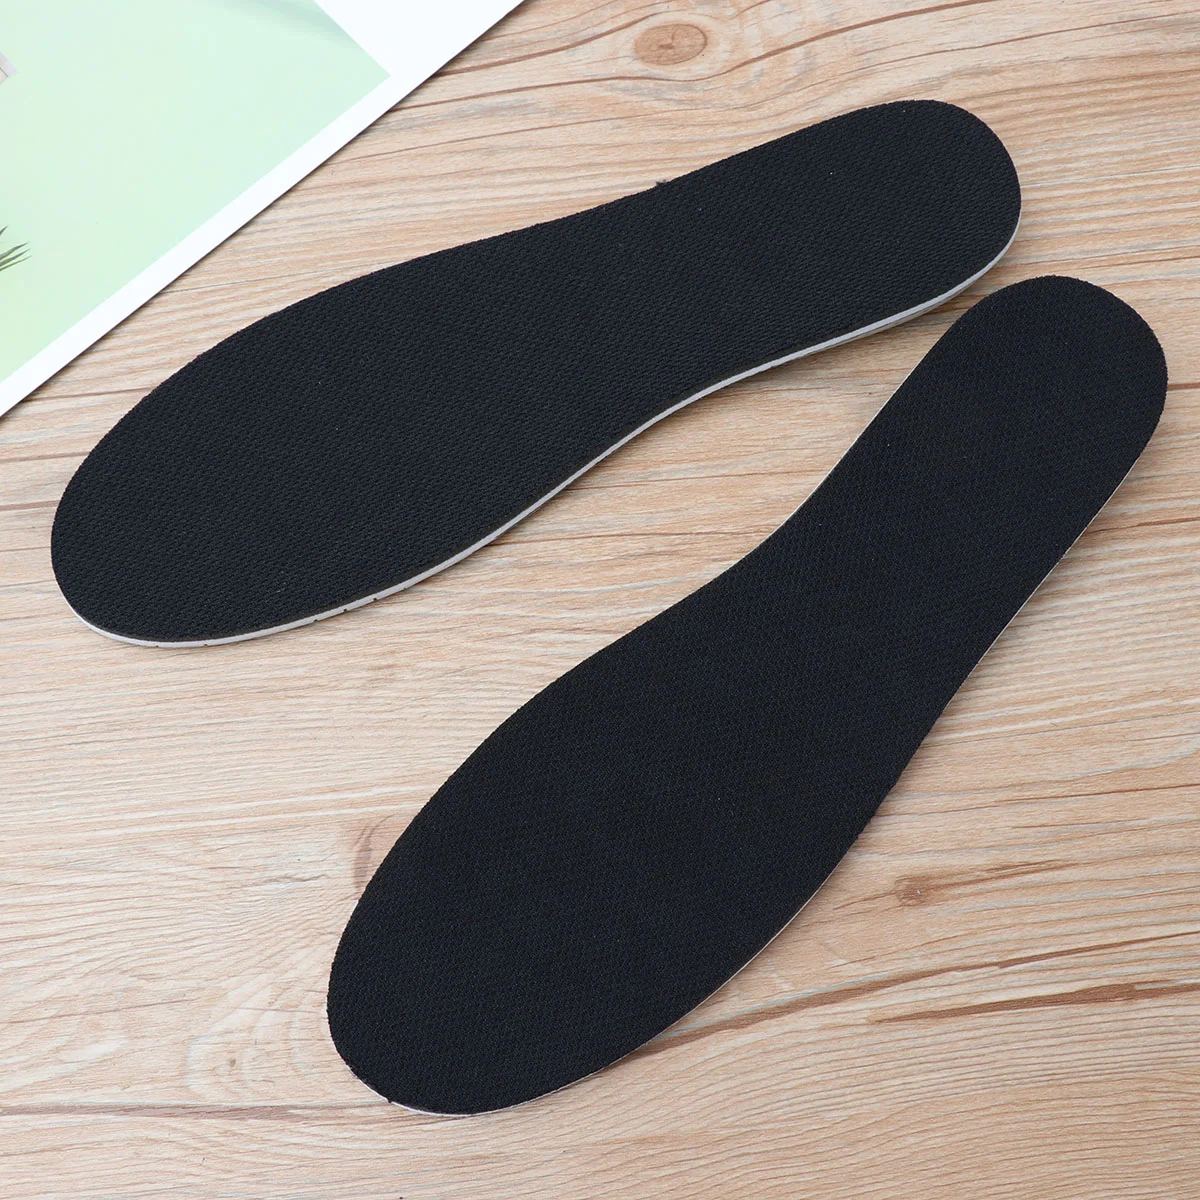 

1 Pair 2CM Increased Insole Invisible Increase Insoles Full Pad Comfort Male And Female Sponge Insoles(Black)